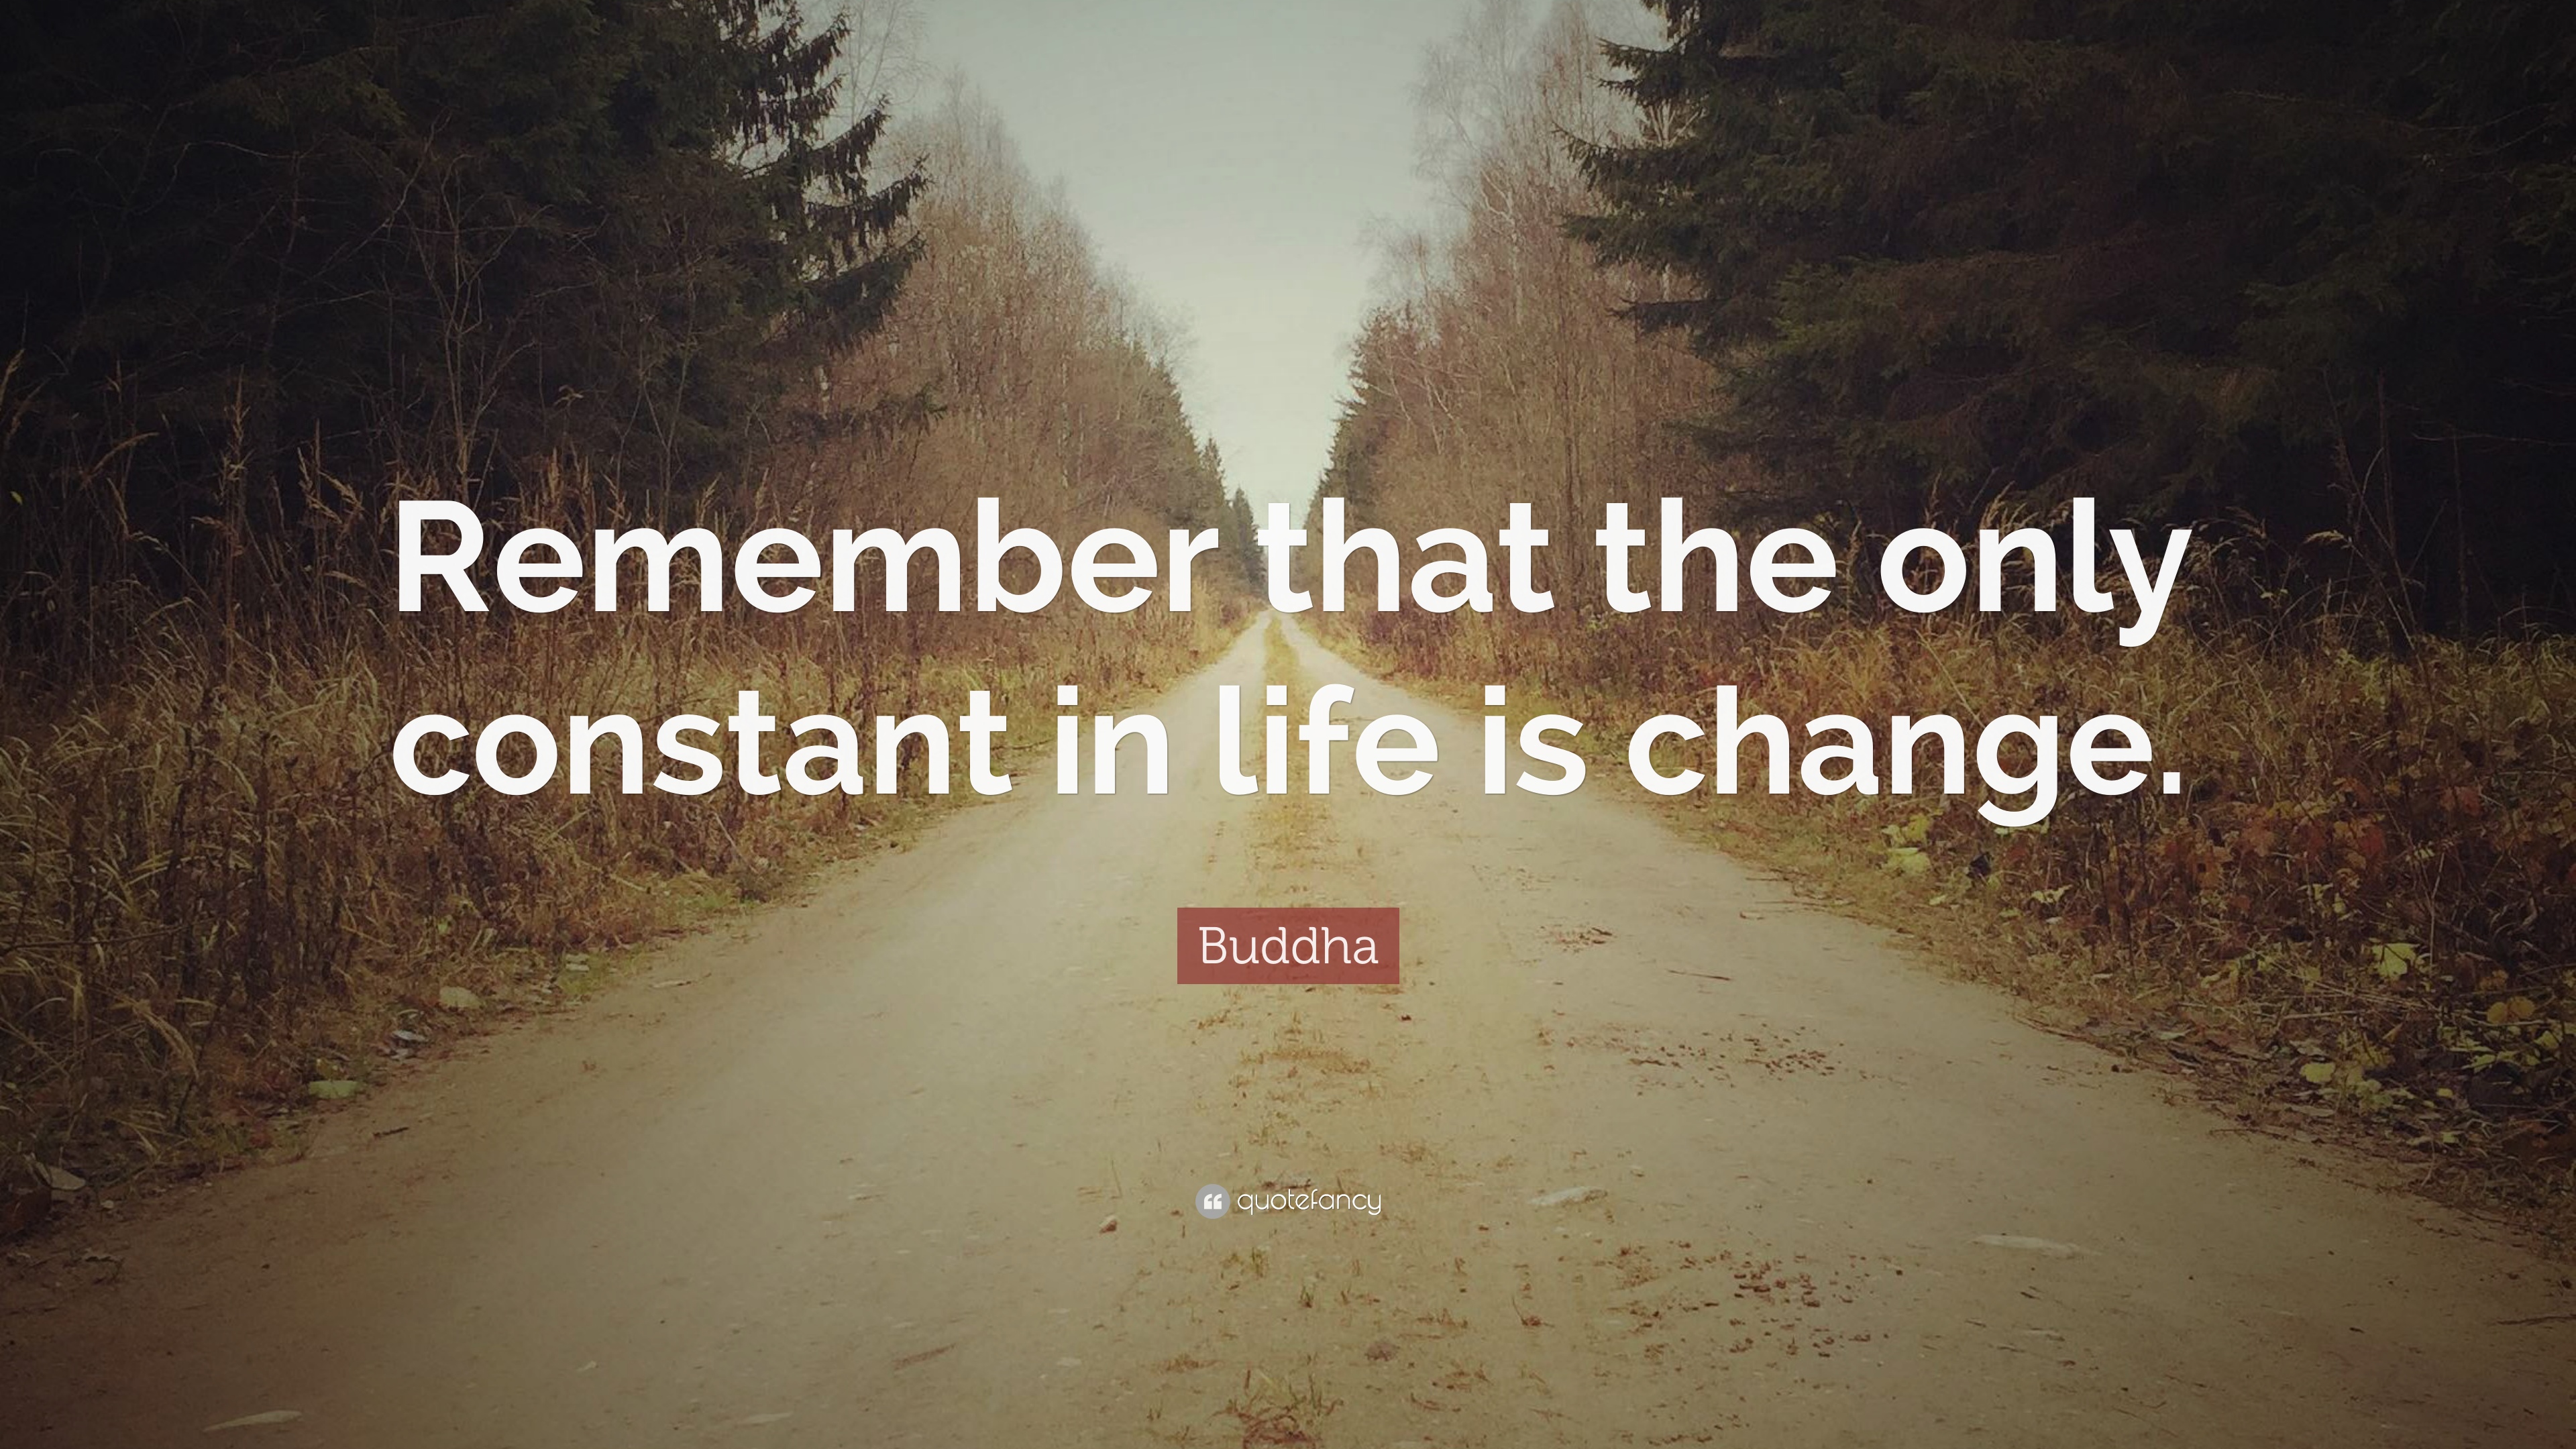 559172-Buddha-Quote-Remember-that-the-only-constant-in-life-is-change.jpg